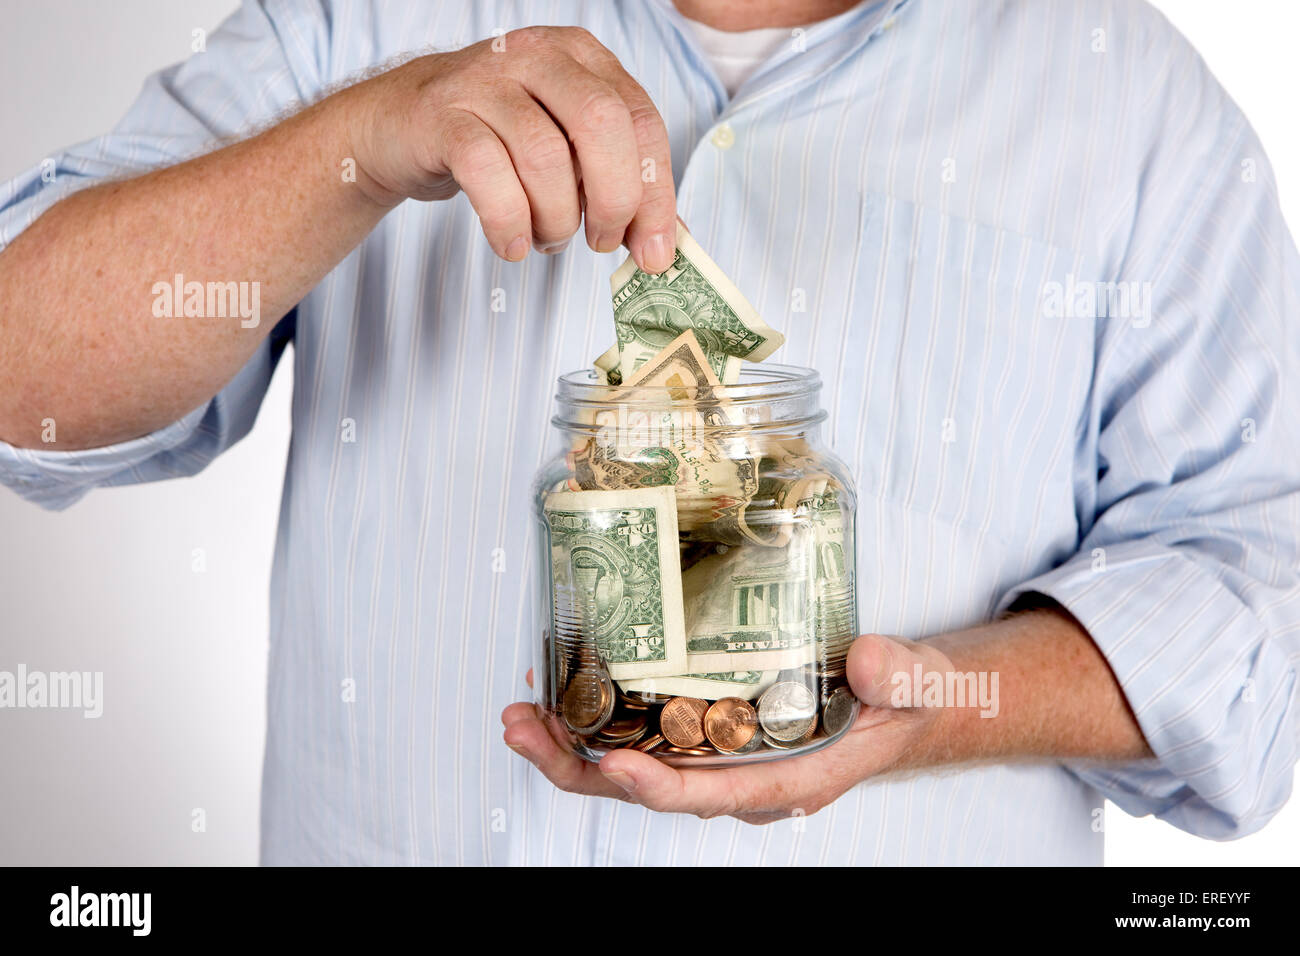 Retiree withdraws money from his savings, bank, or IRA account piggy bank concept. Stock Photo